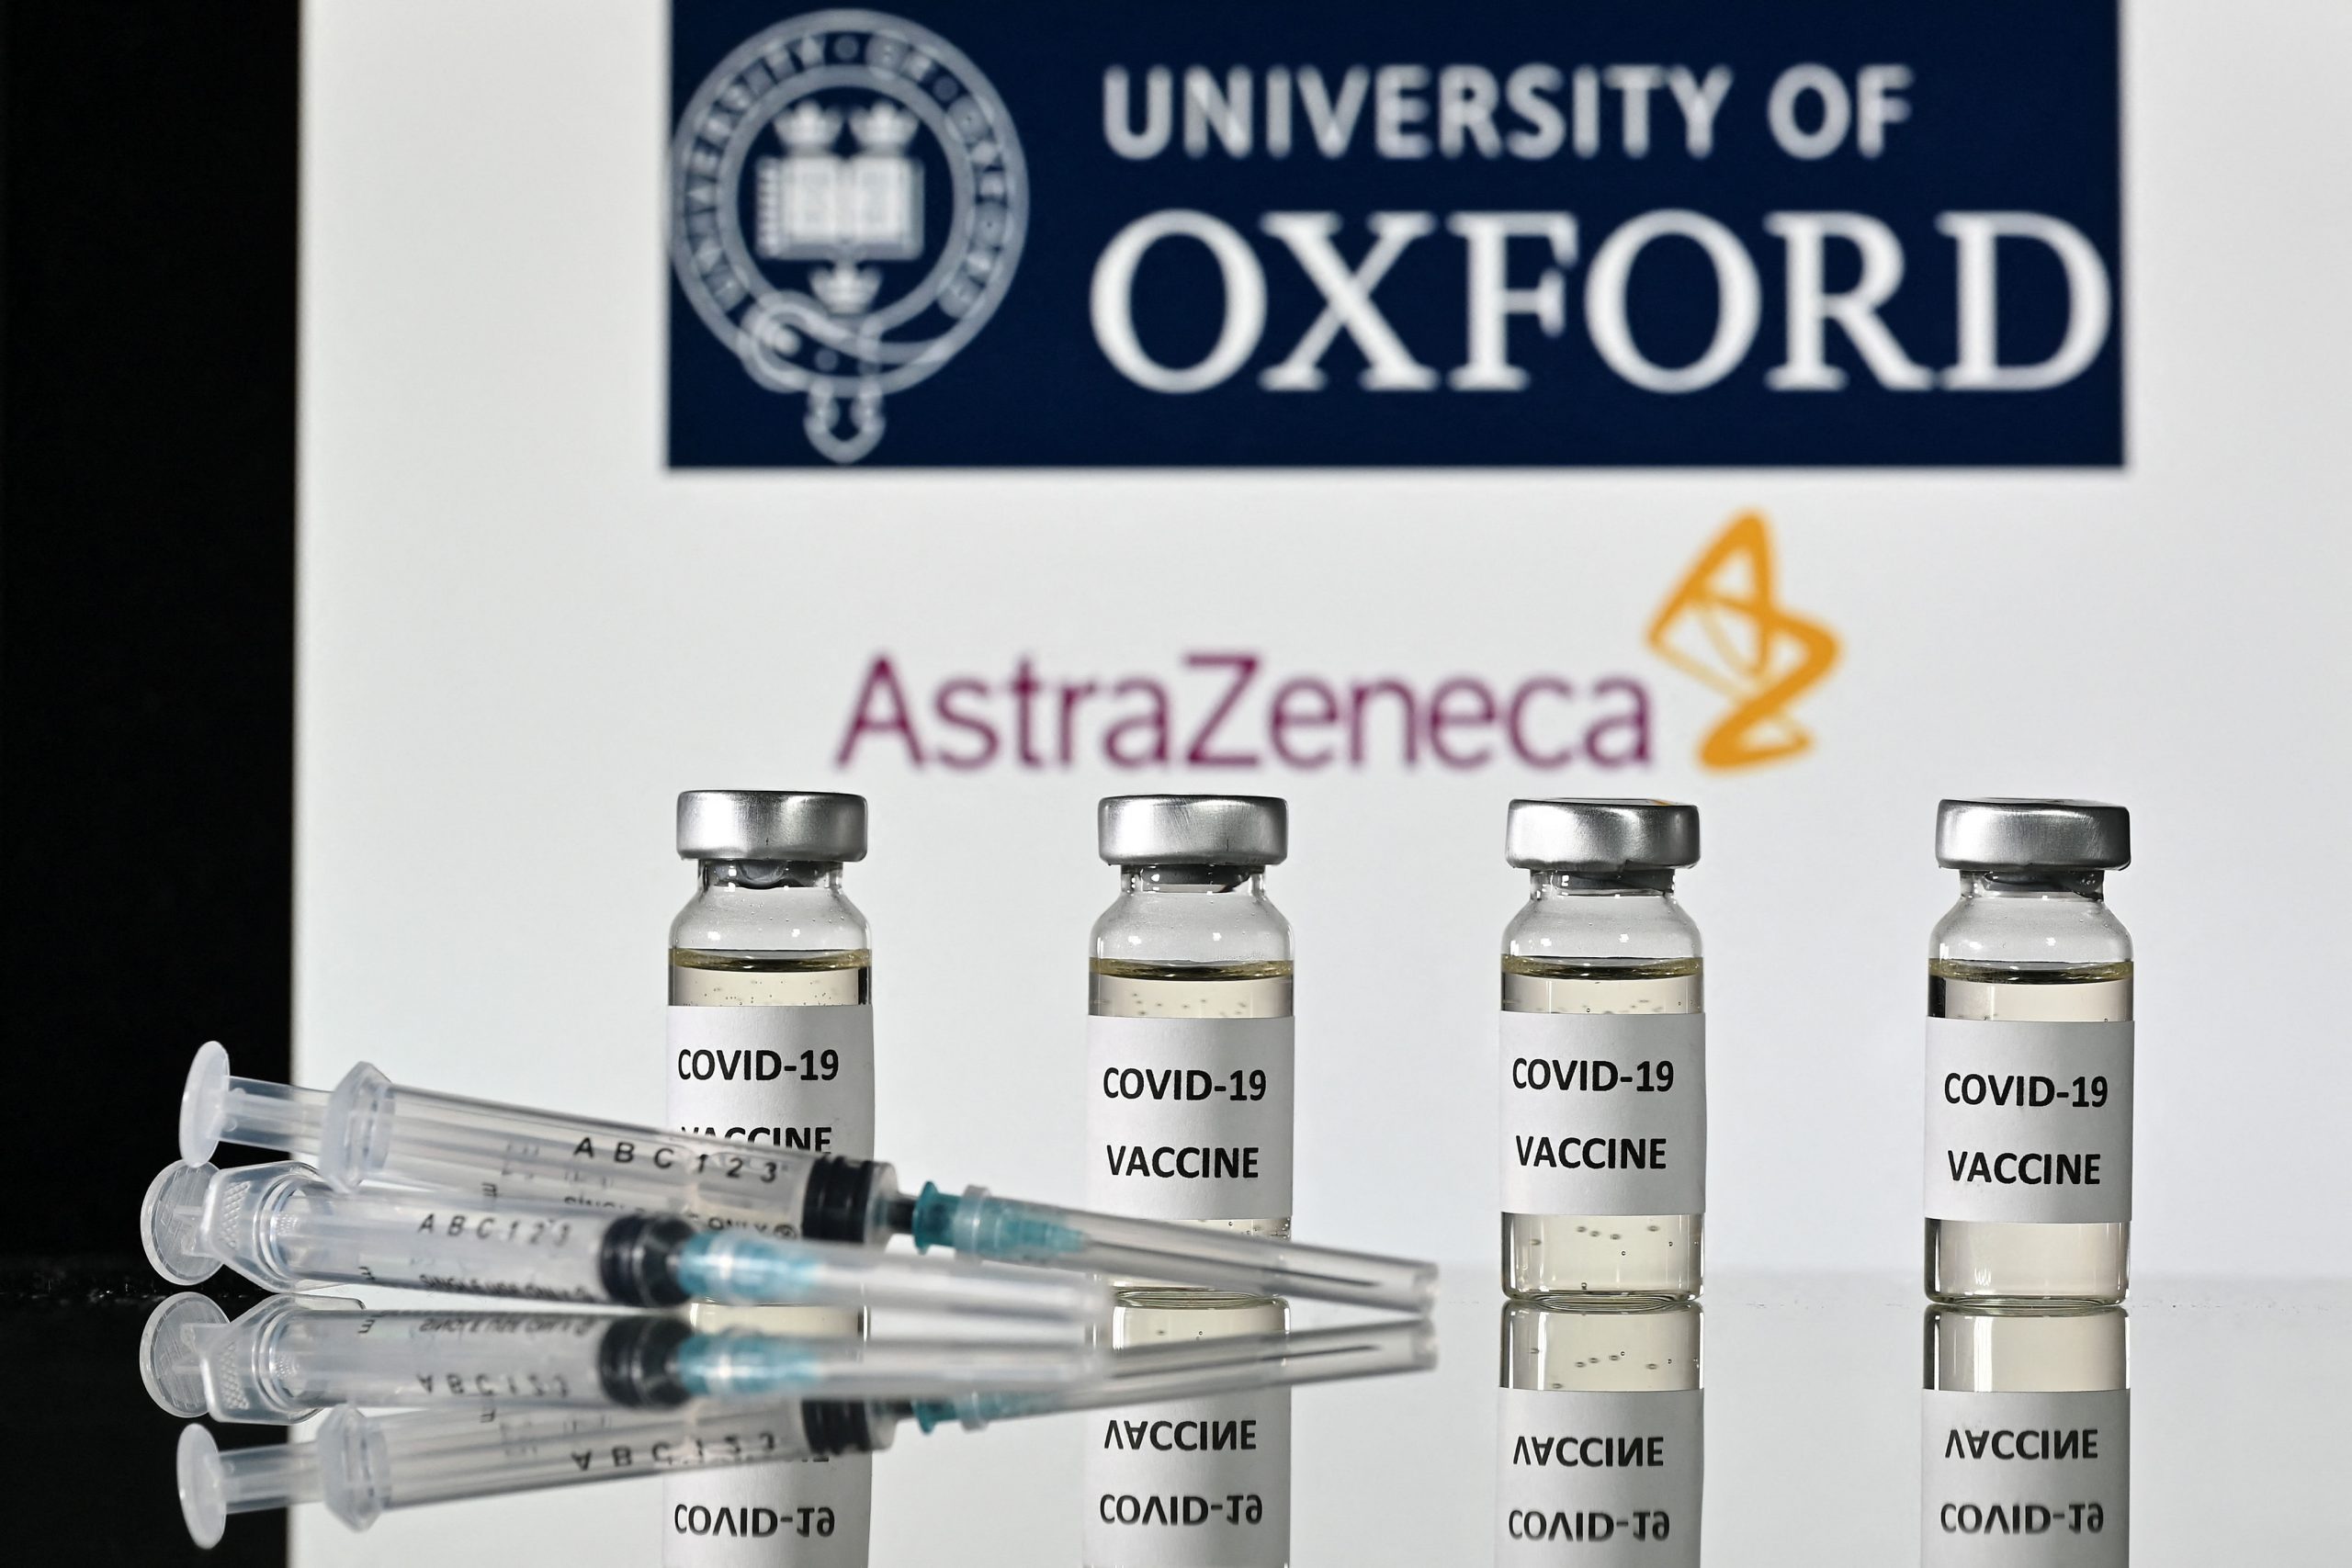 UK records 30 cases of blood clots after AstraZeneca COVID-19 vaccine shot